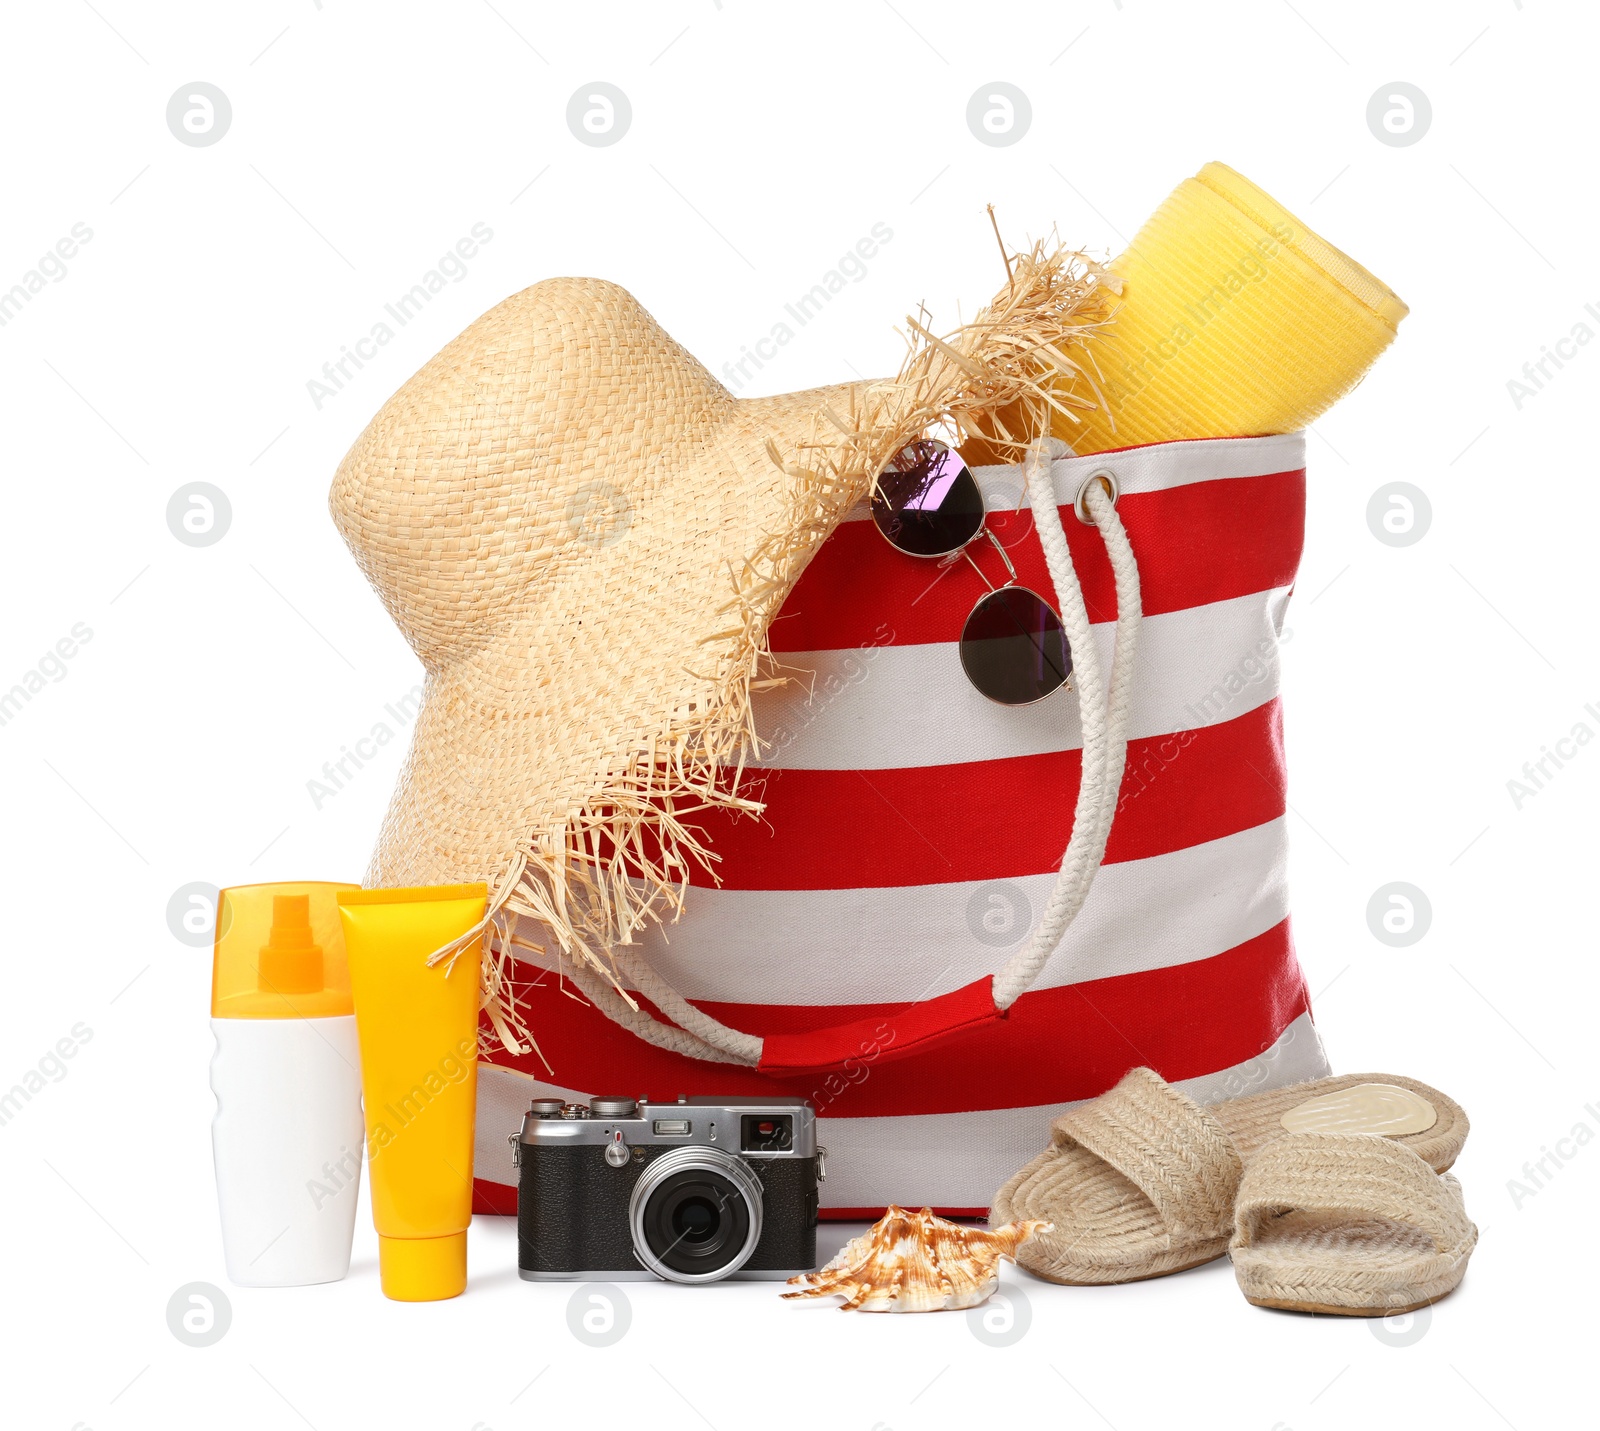 Photo of Stylish bag with beach accessories and camera isolated on white